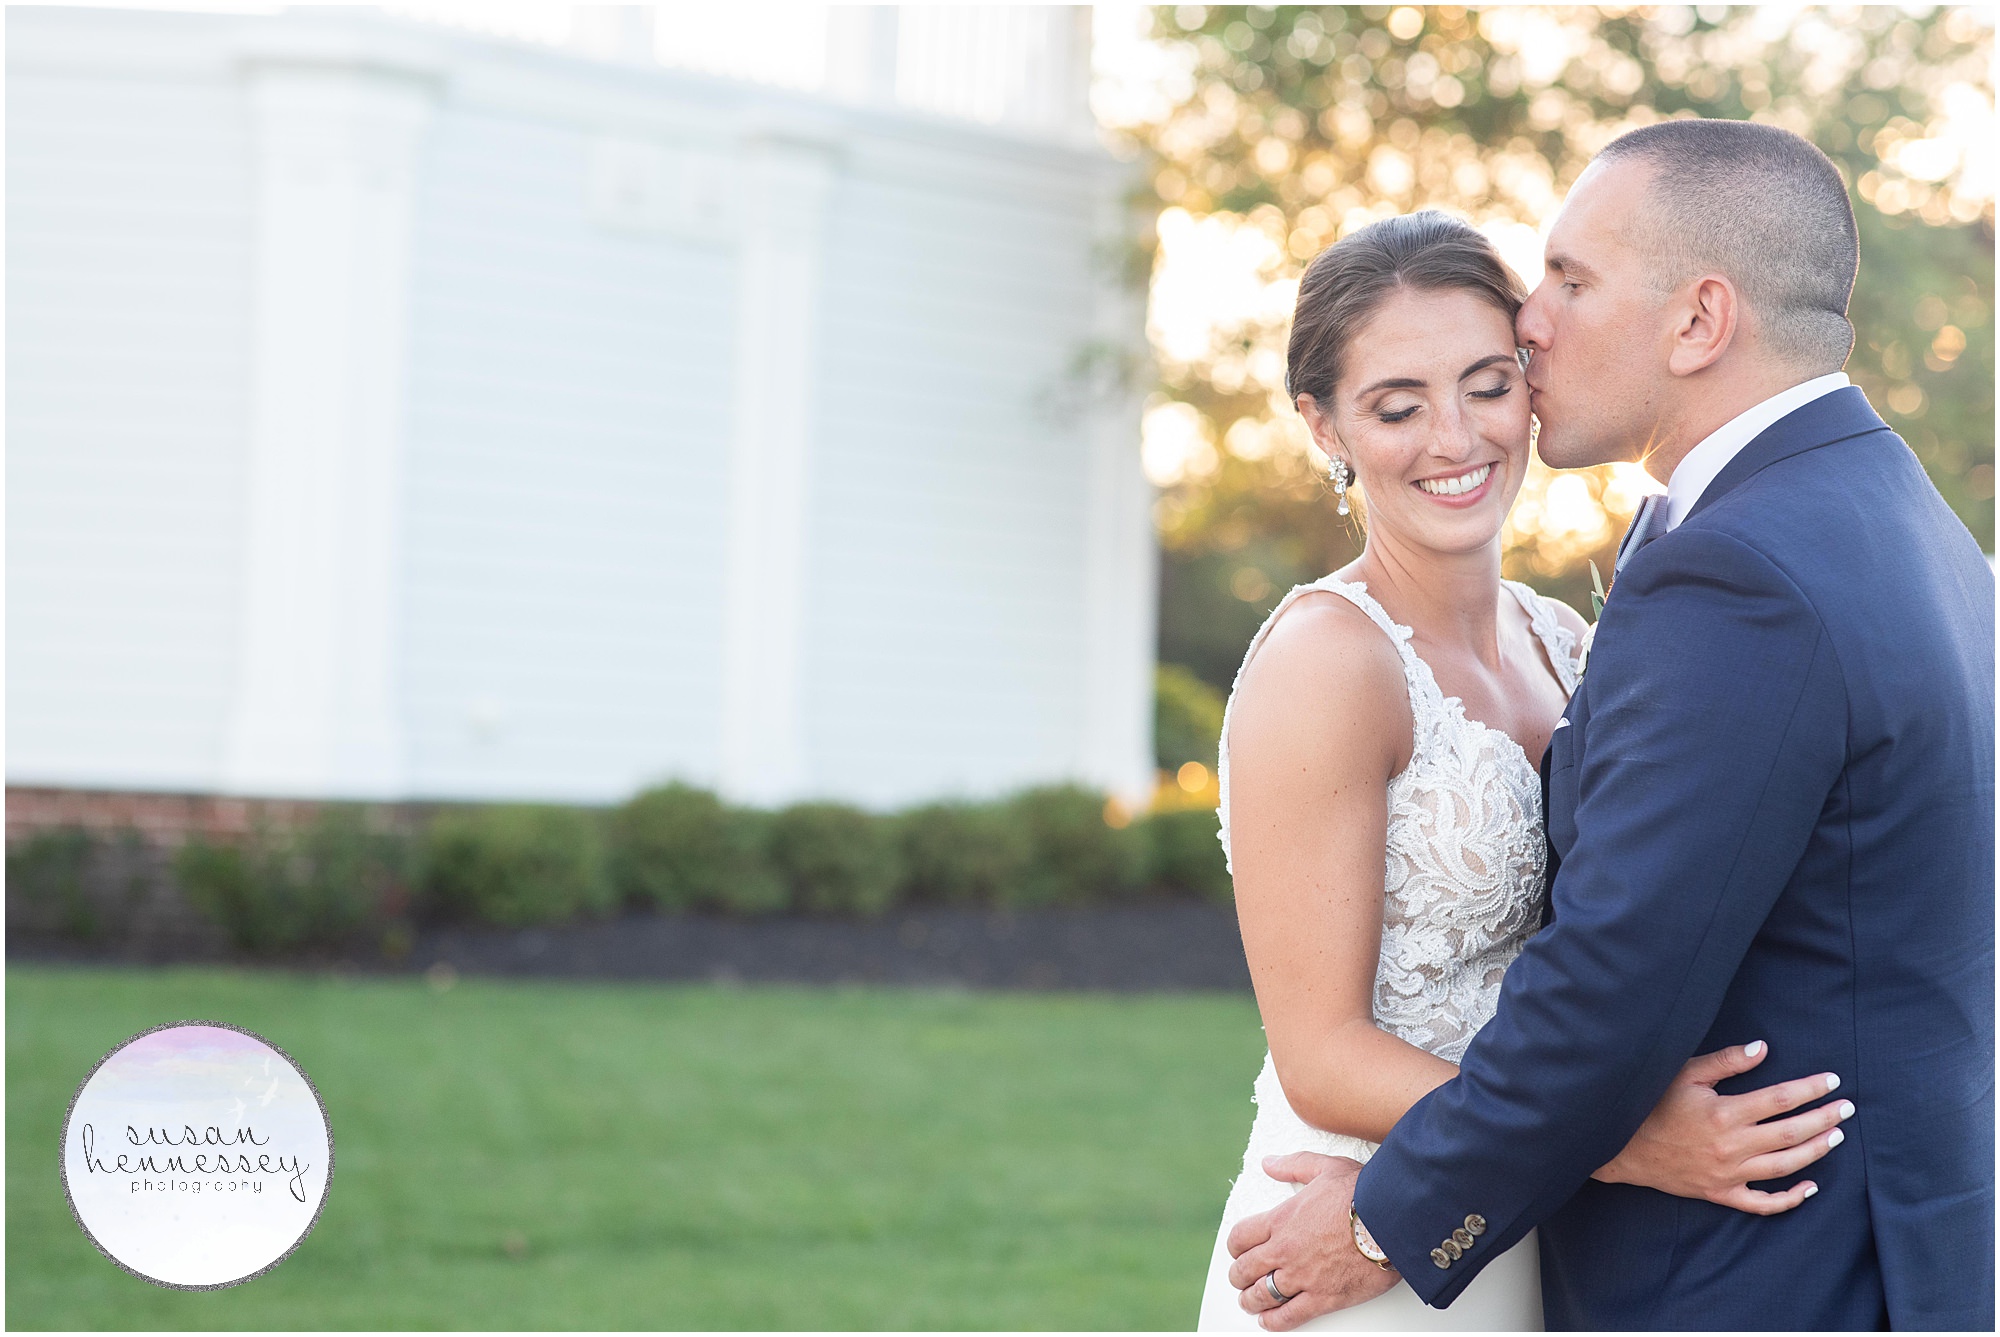 Sunset portraits of bride and groom at ACCC